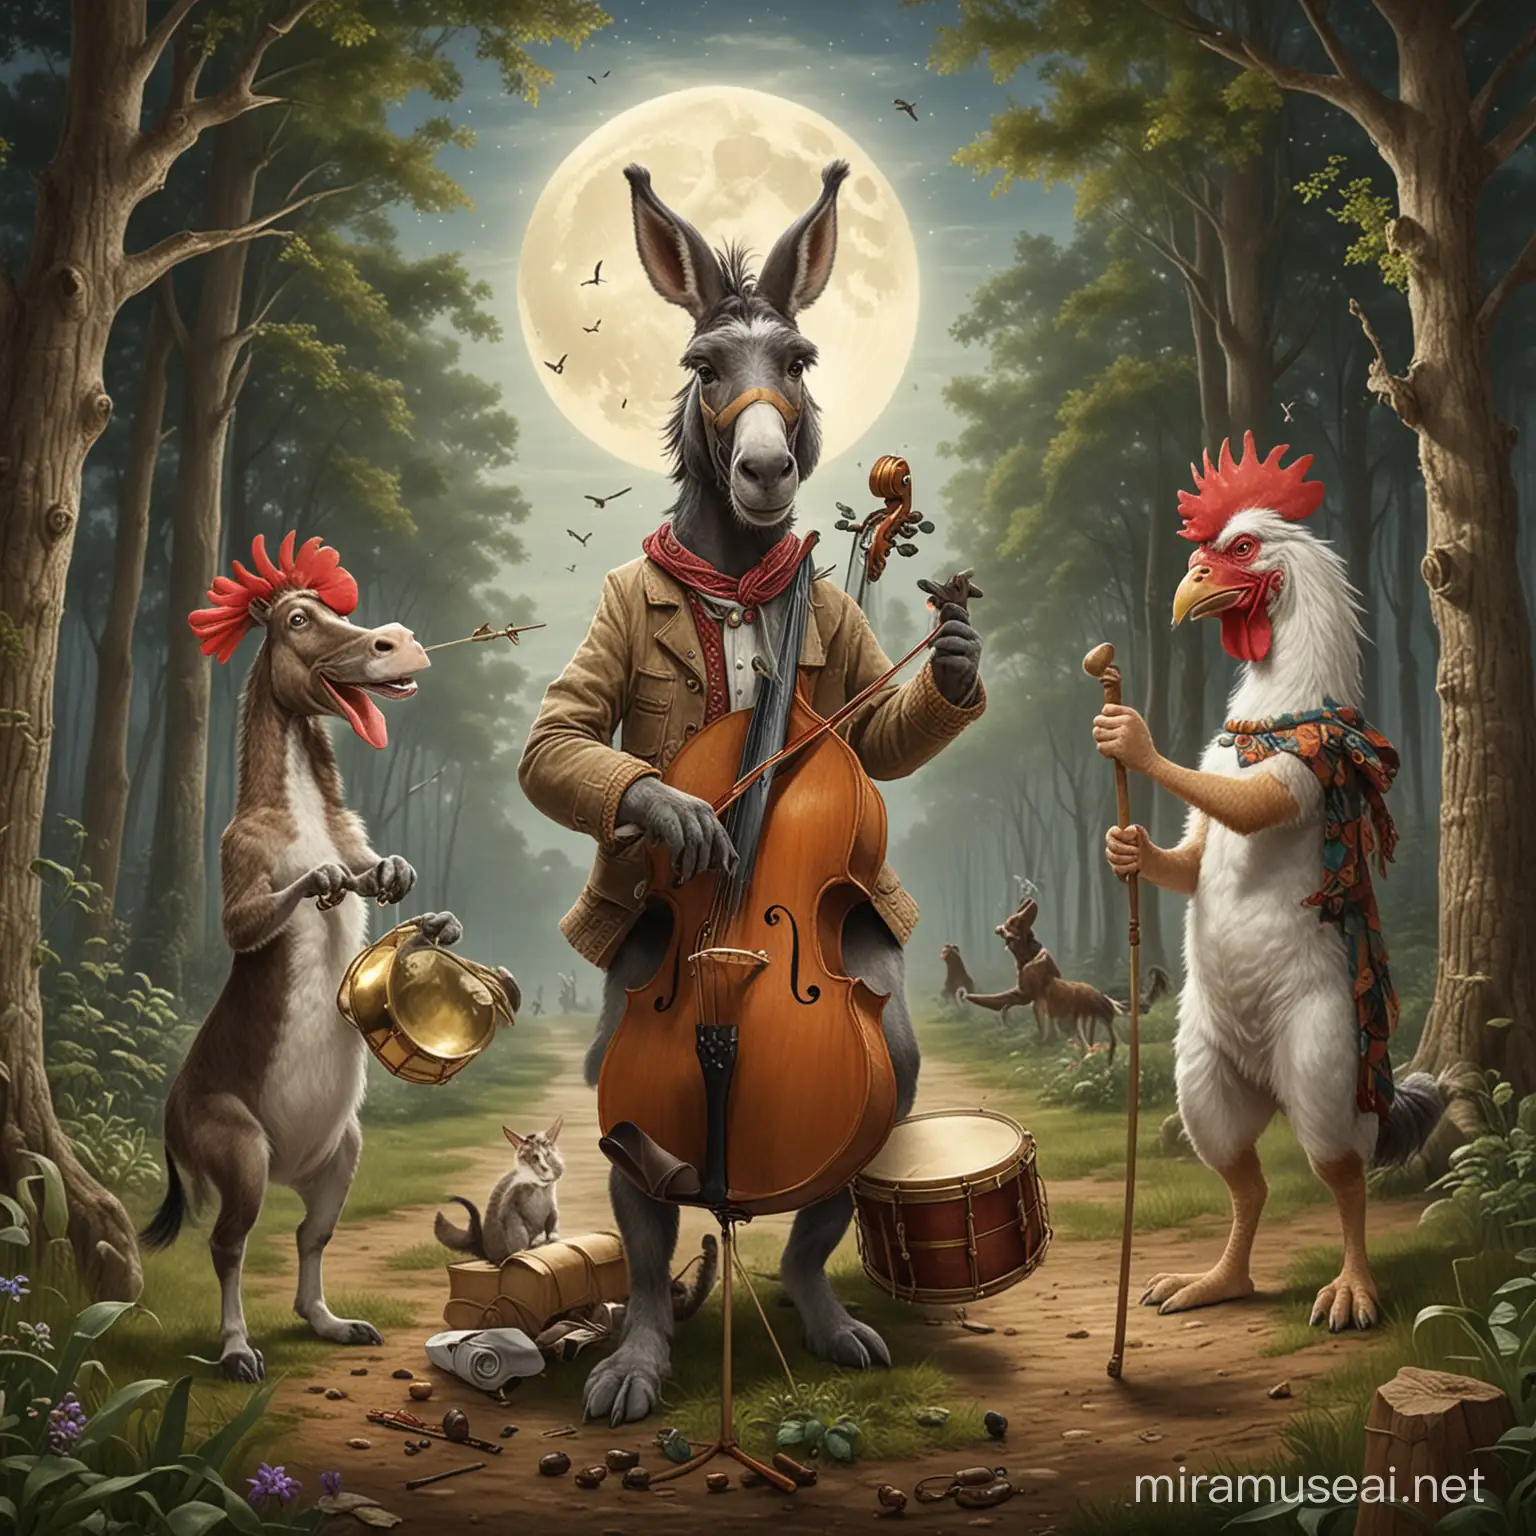 Forest Animal Band Playing Music Under the Full Moon